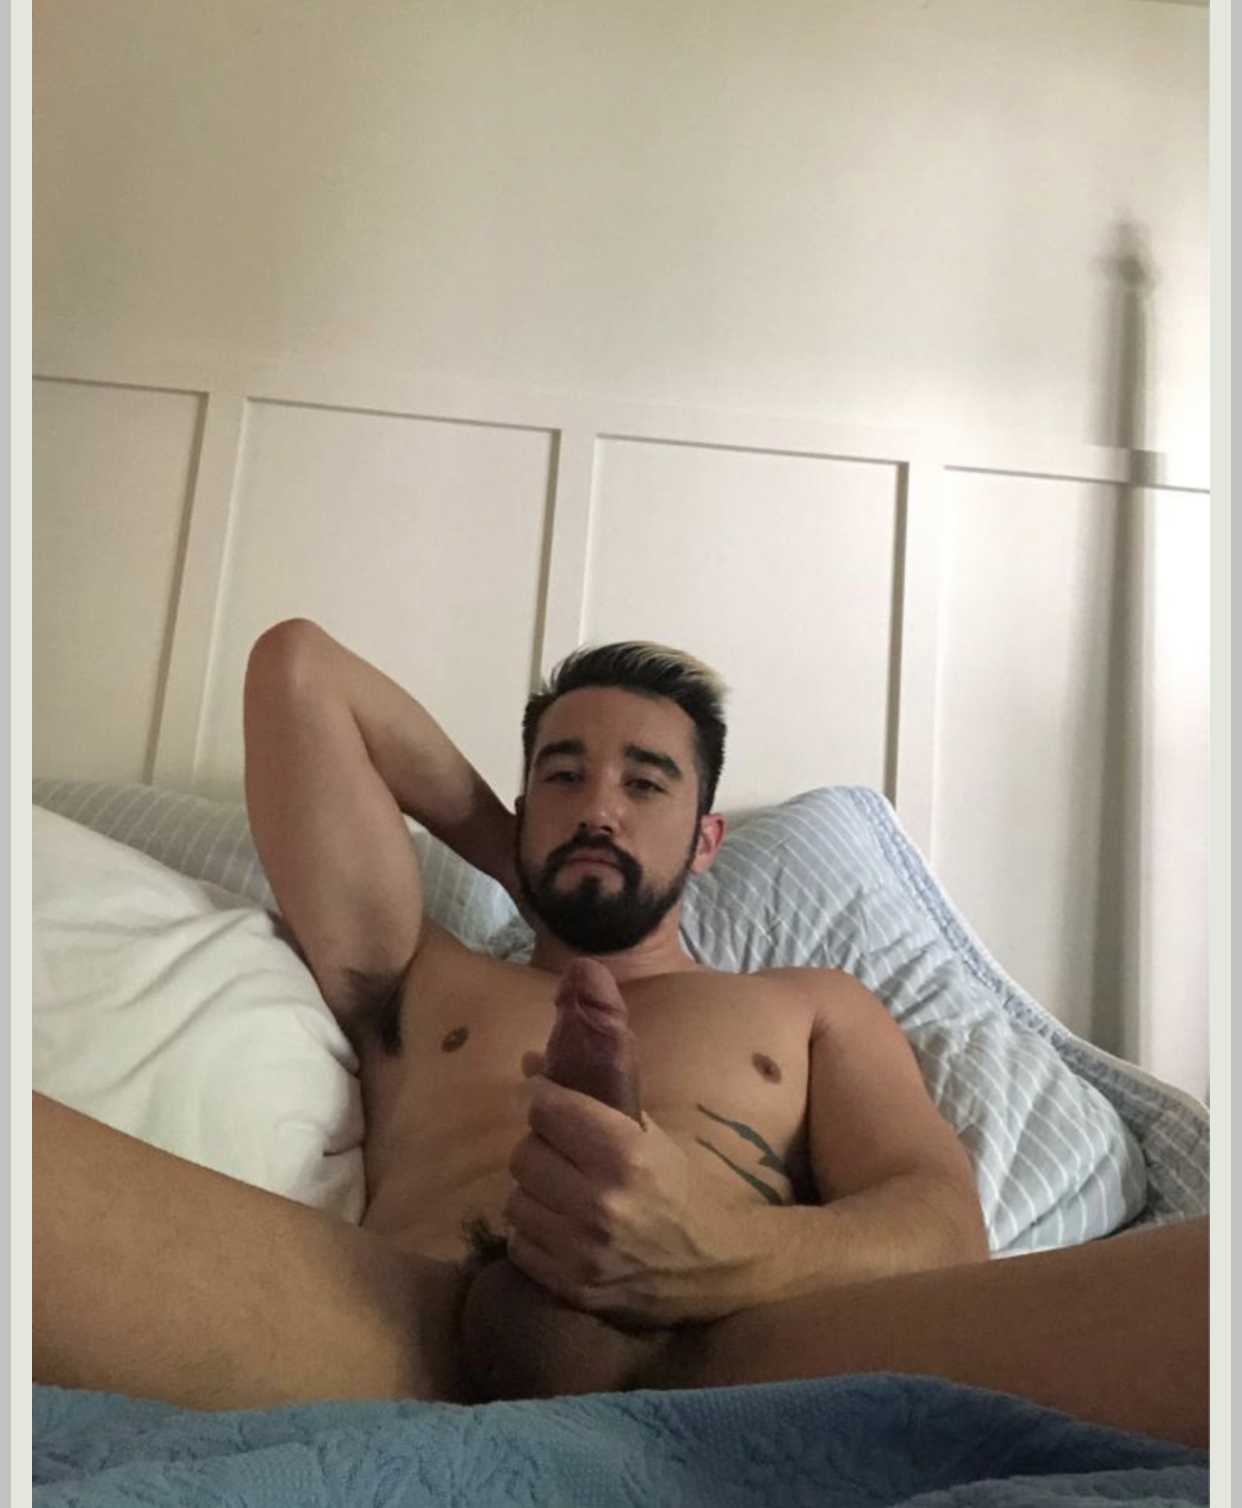 Don’t care if his dick smells https://www.malegeneral.com/cam/dongs/res/164...